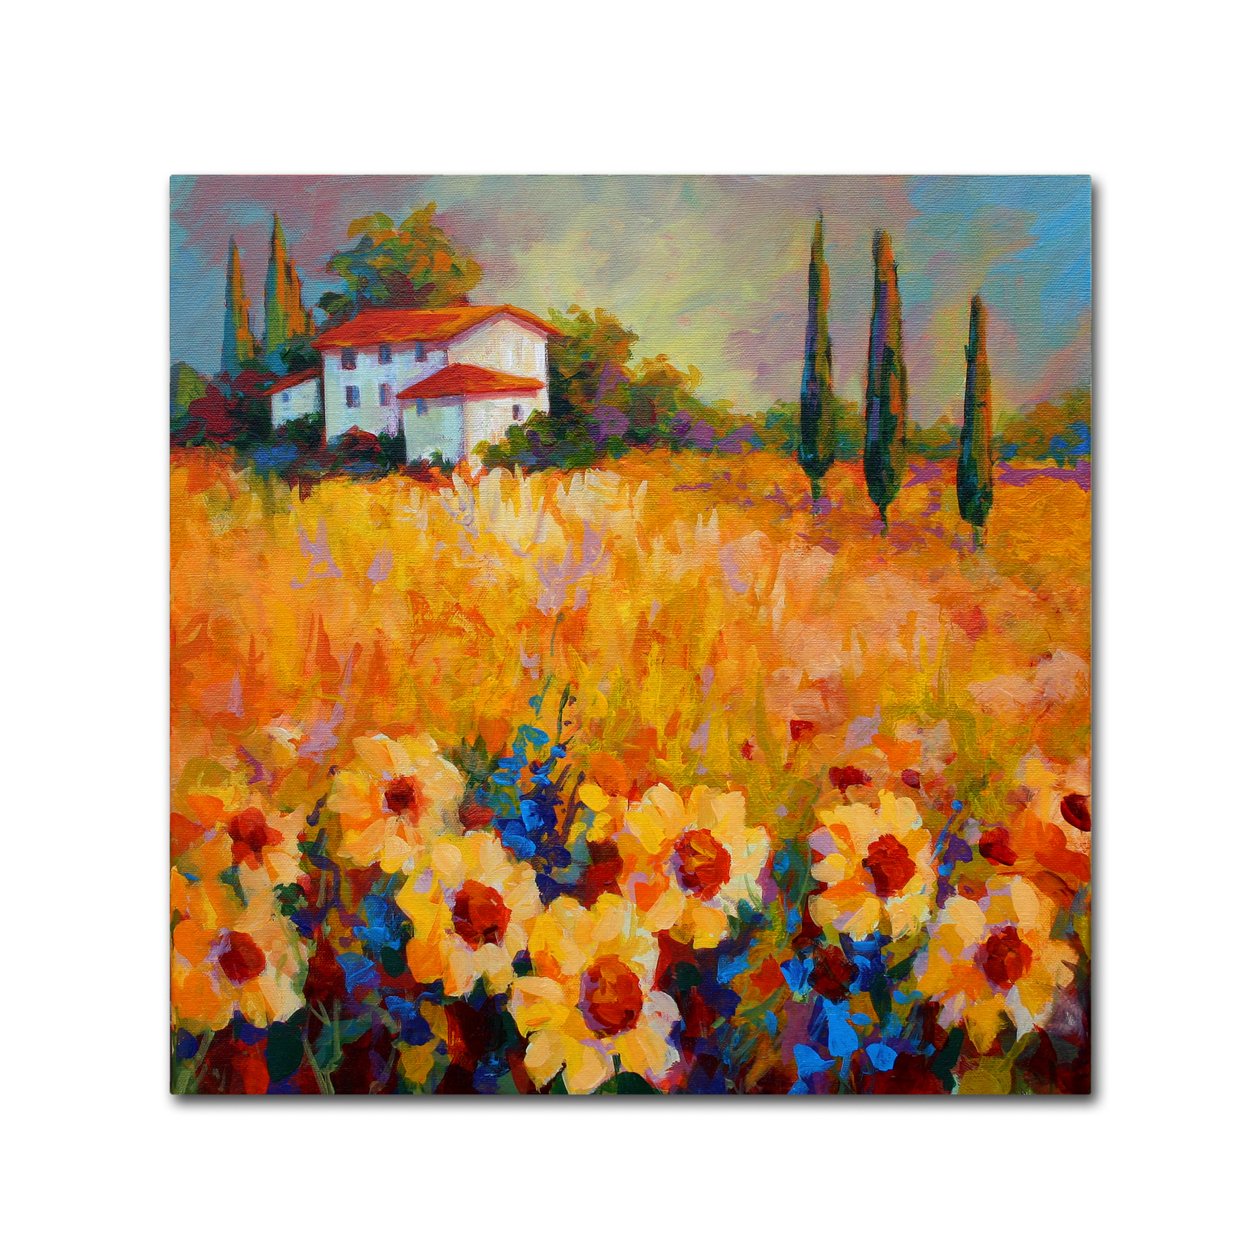 Marion Rose 'Tuscan Sunflowers' Ready To Hang Canvas Art 35 X 35 Inches Made In USA